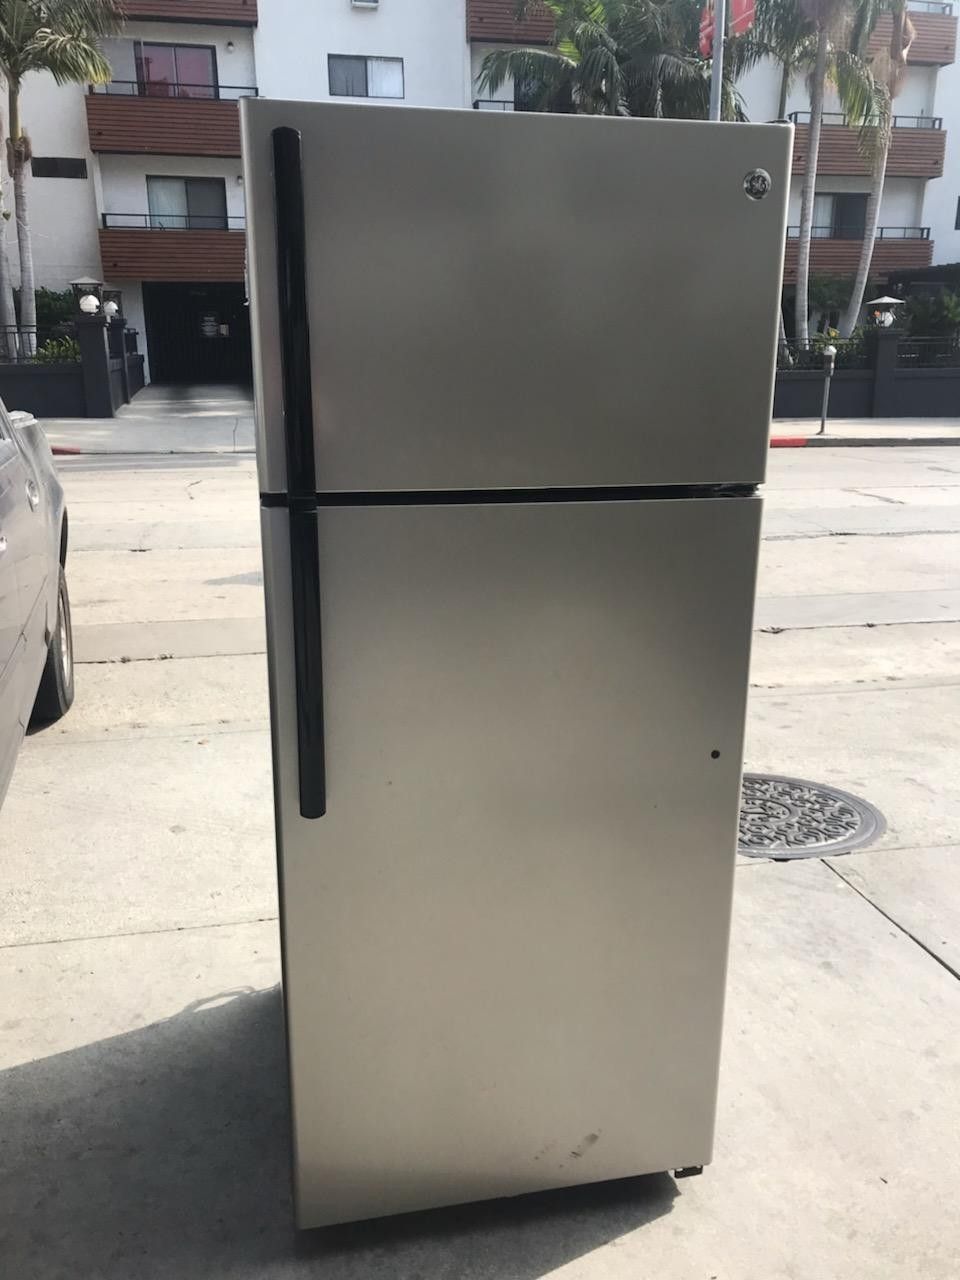 $299 GE stainless 18 cubic fridge 2015-16 model includes delivery in the San Fernando valley warranty and installation included